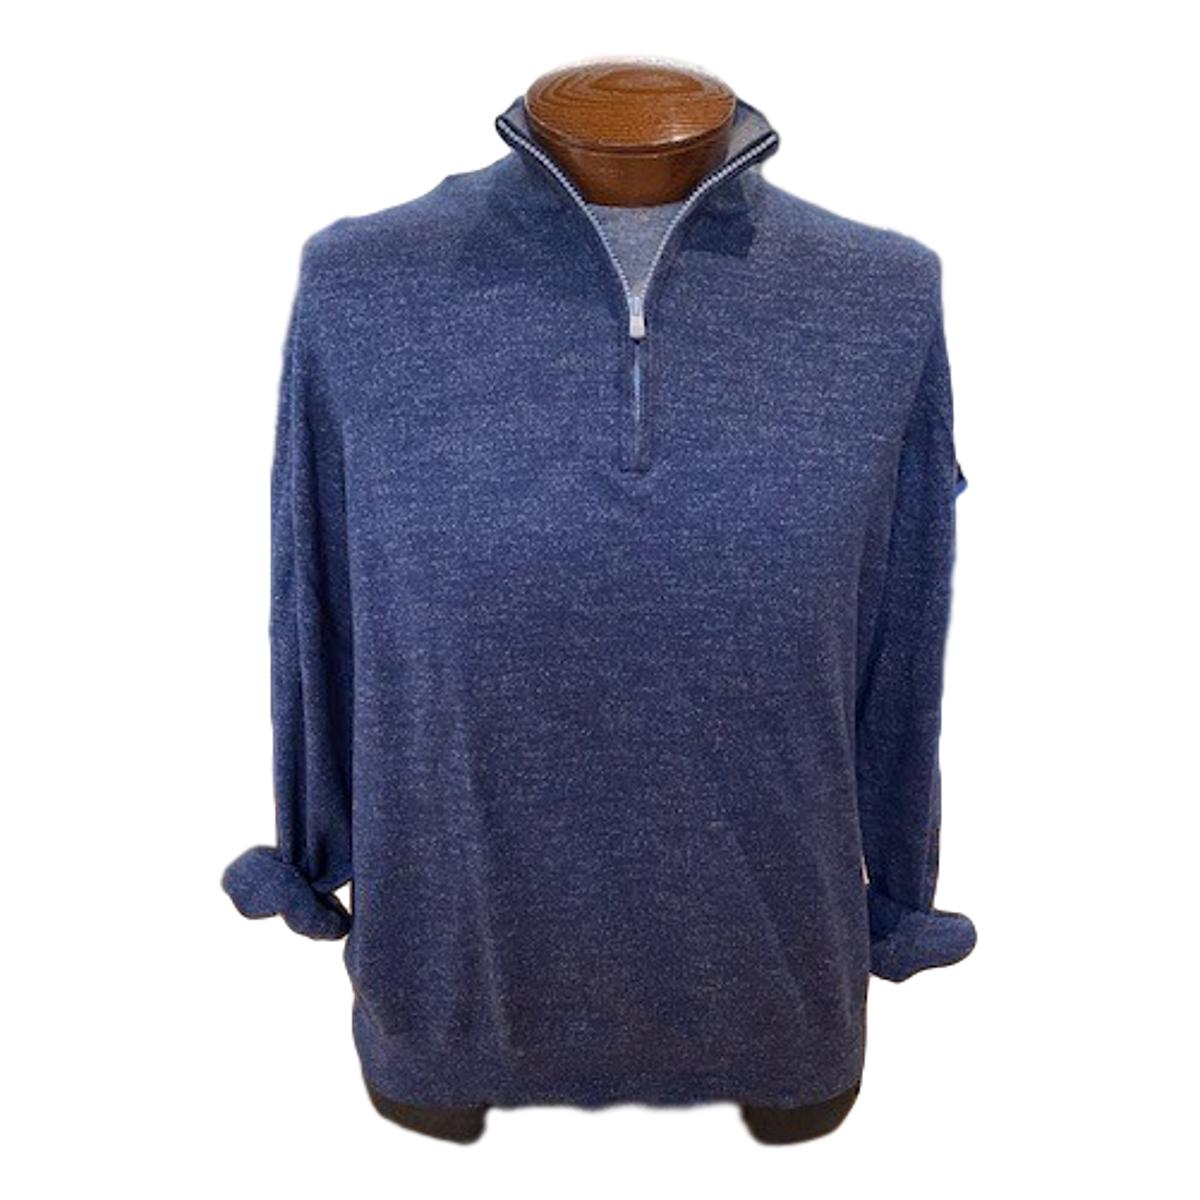 Men's Knit Shirts | Family Britches